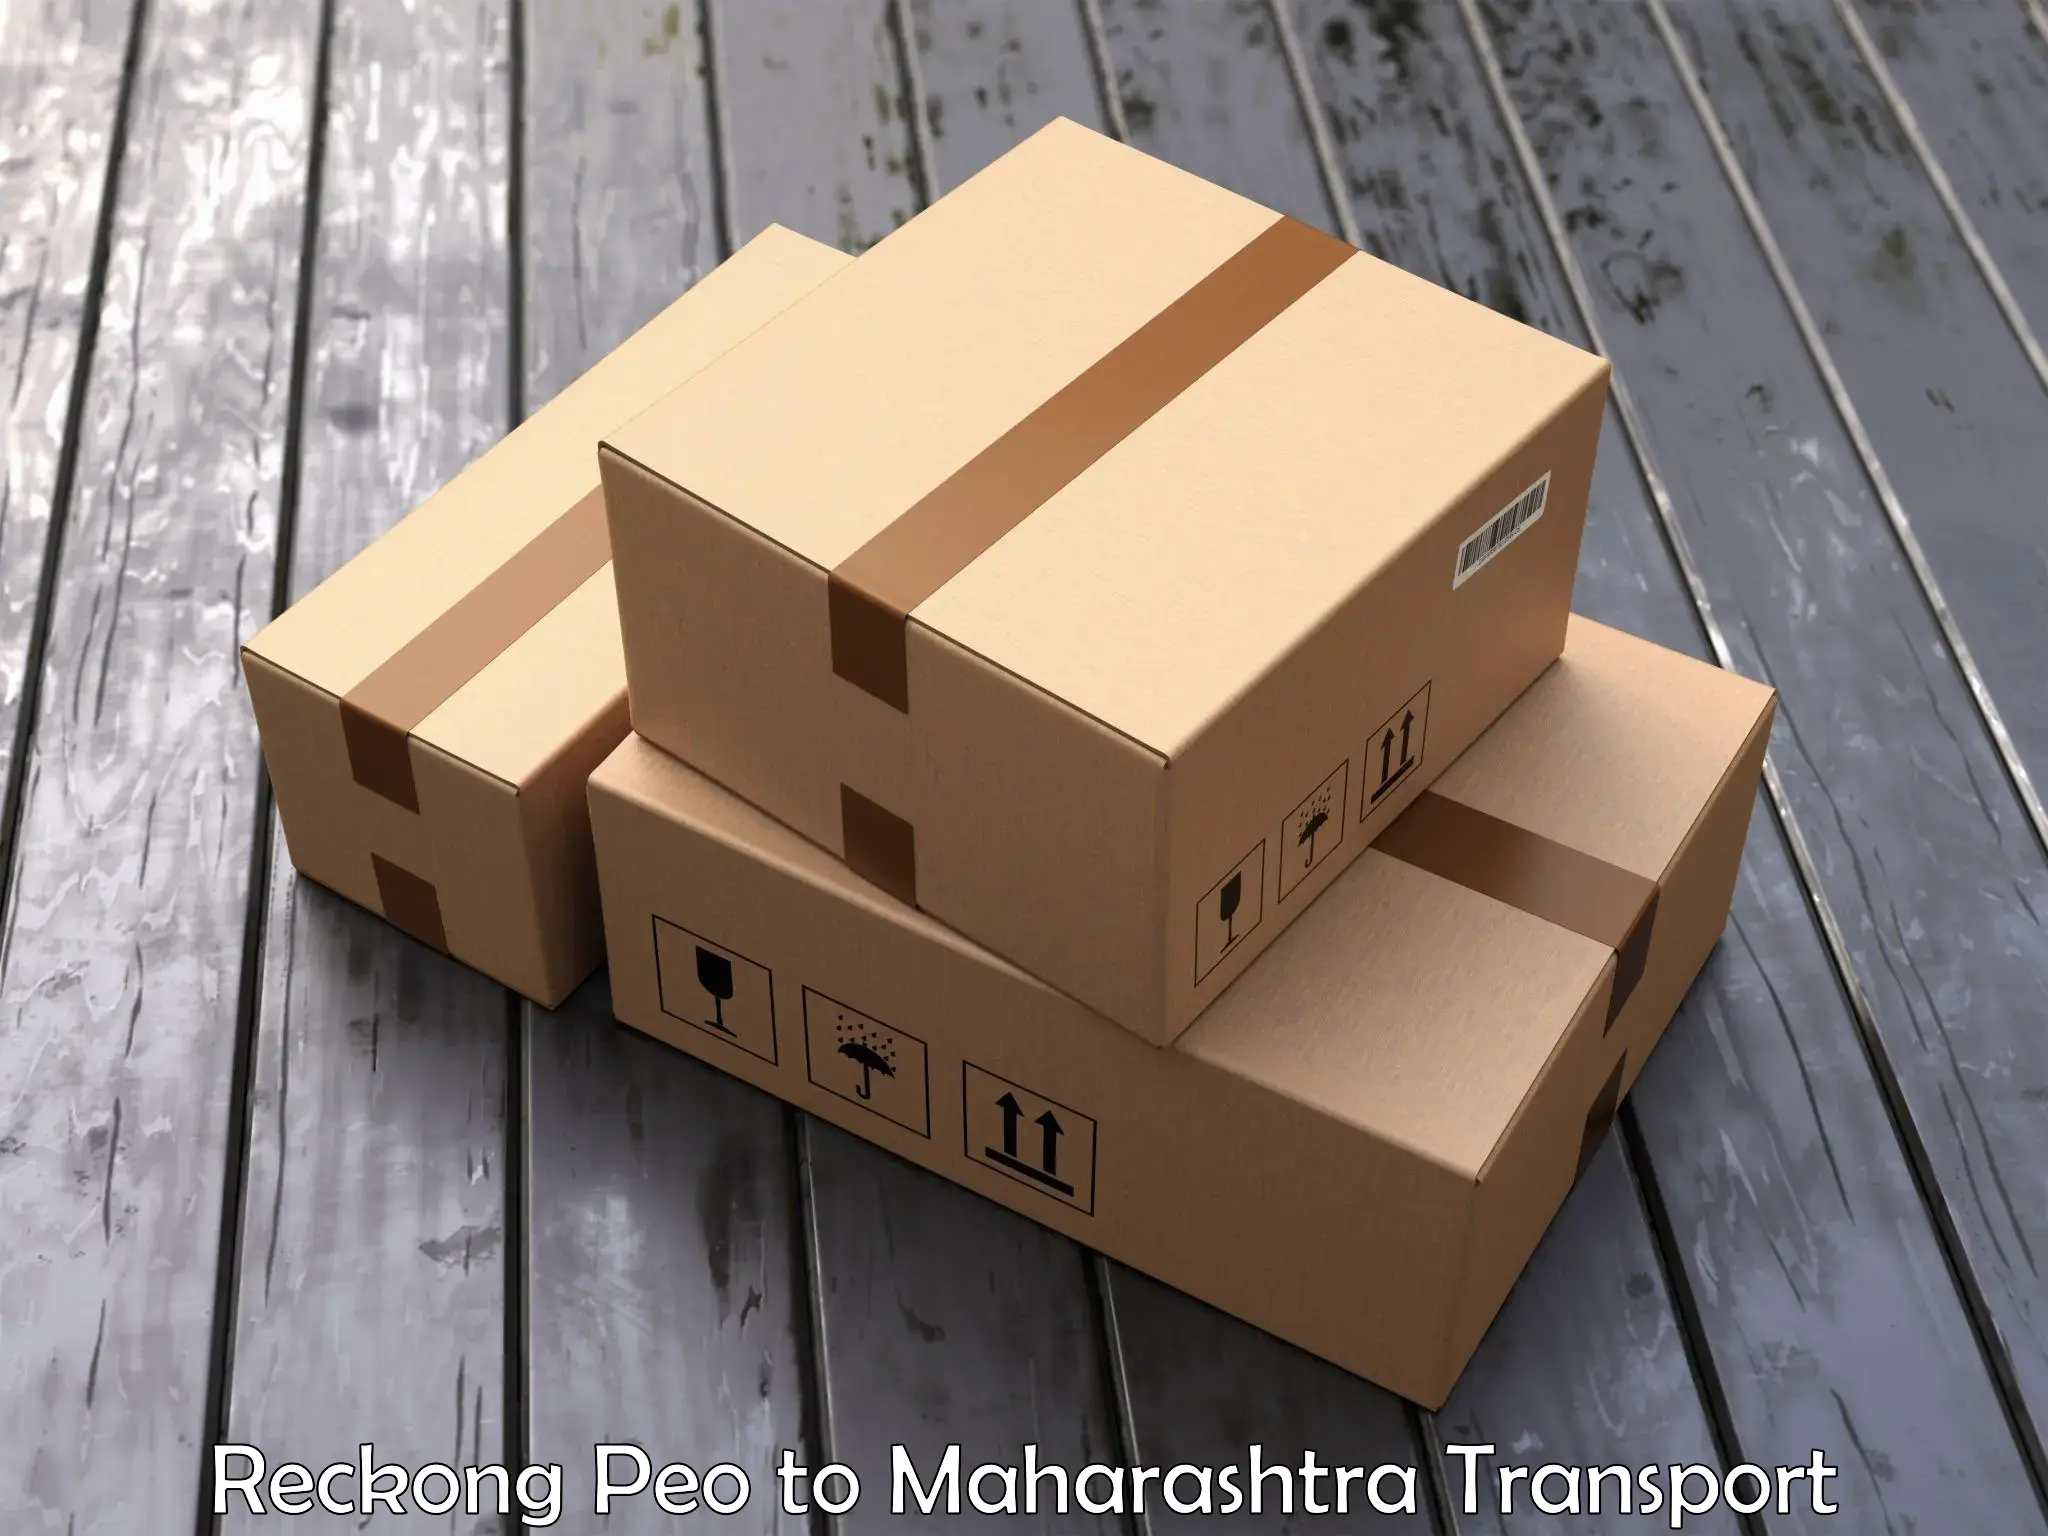 Container transport service Reckong Peo to Maharashtra